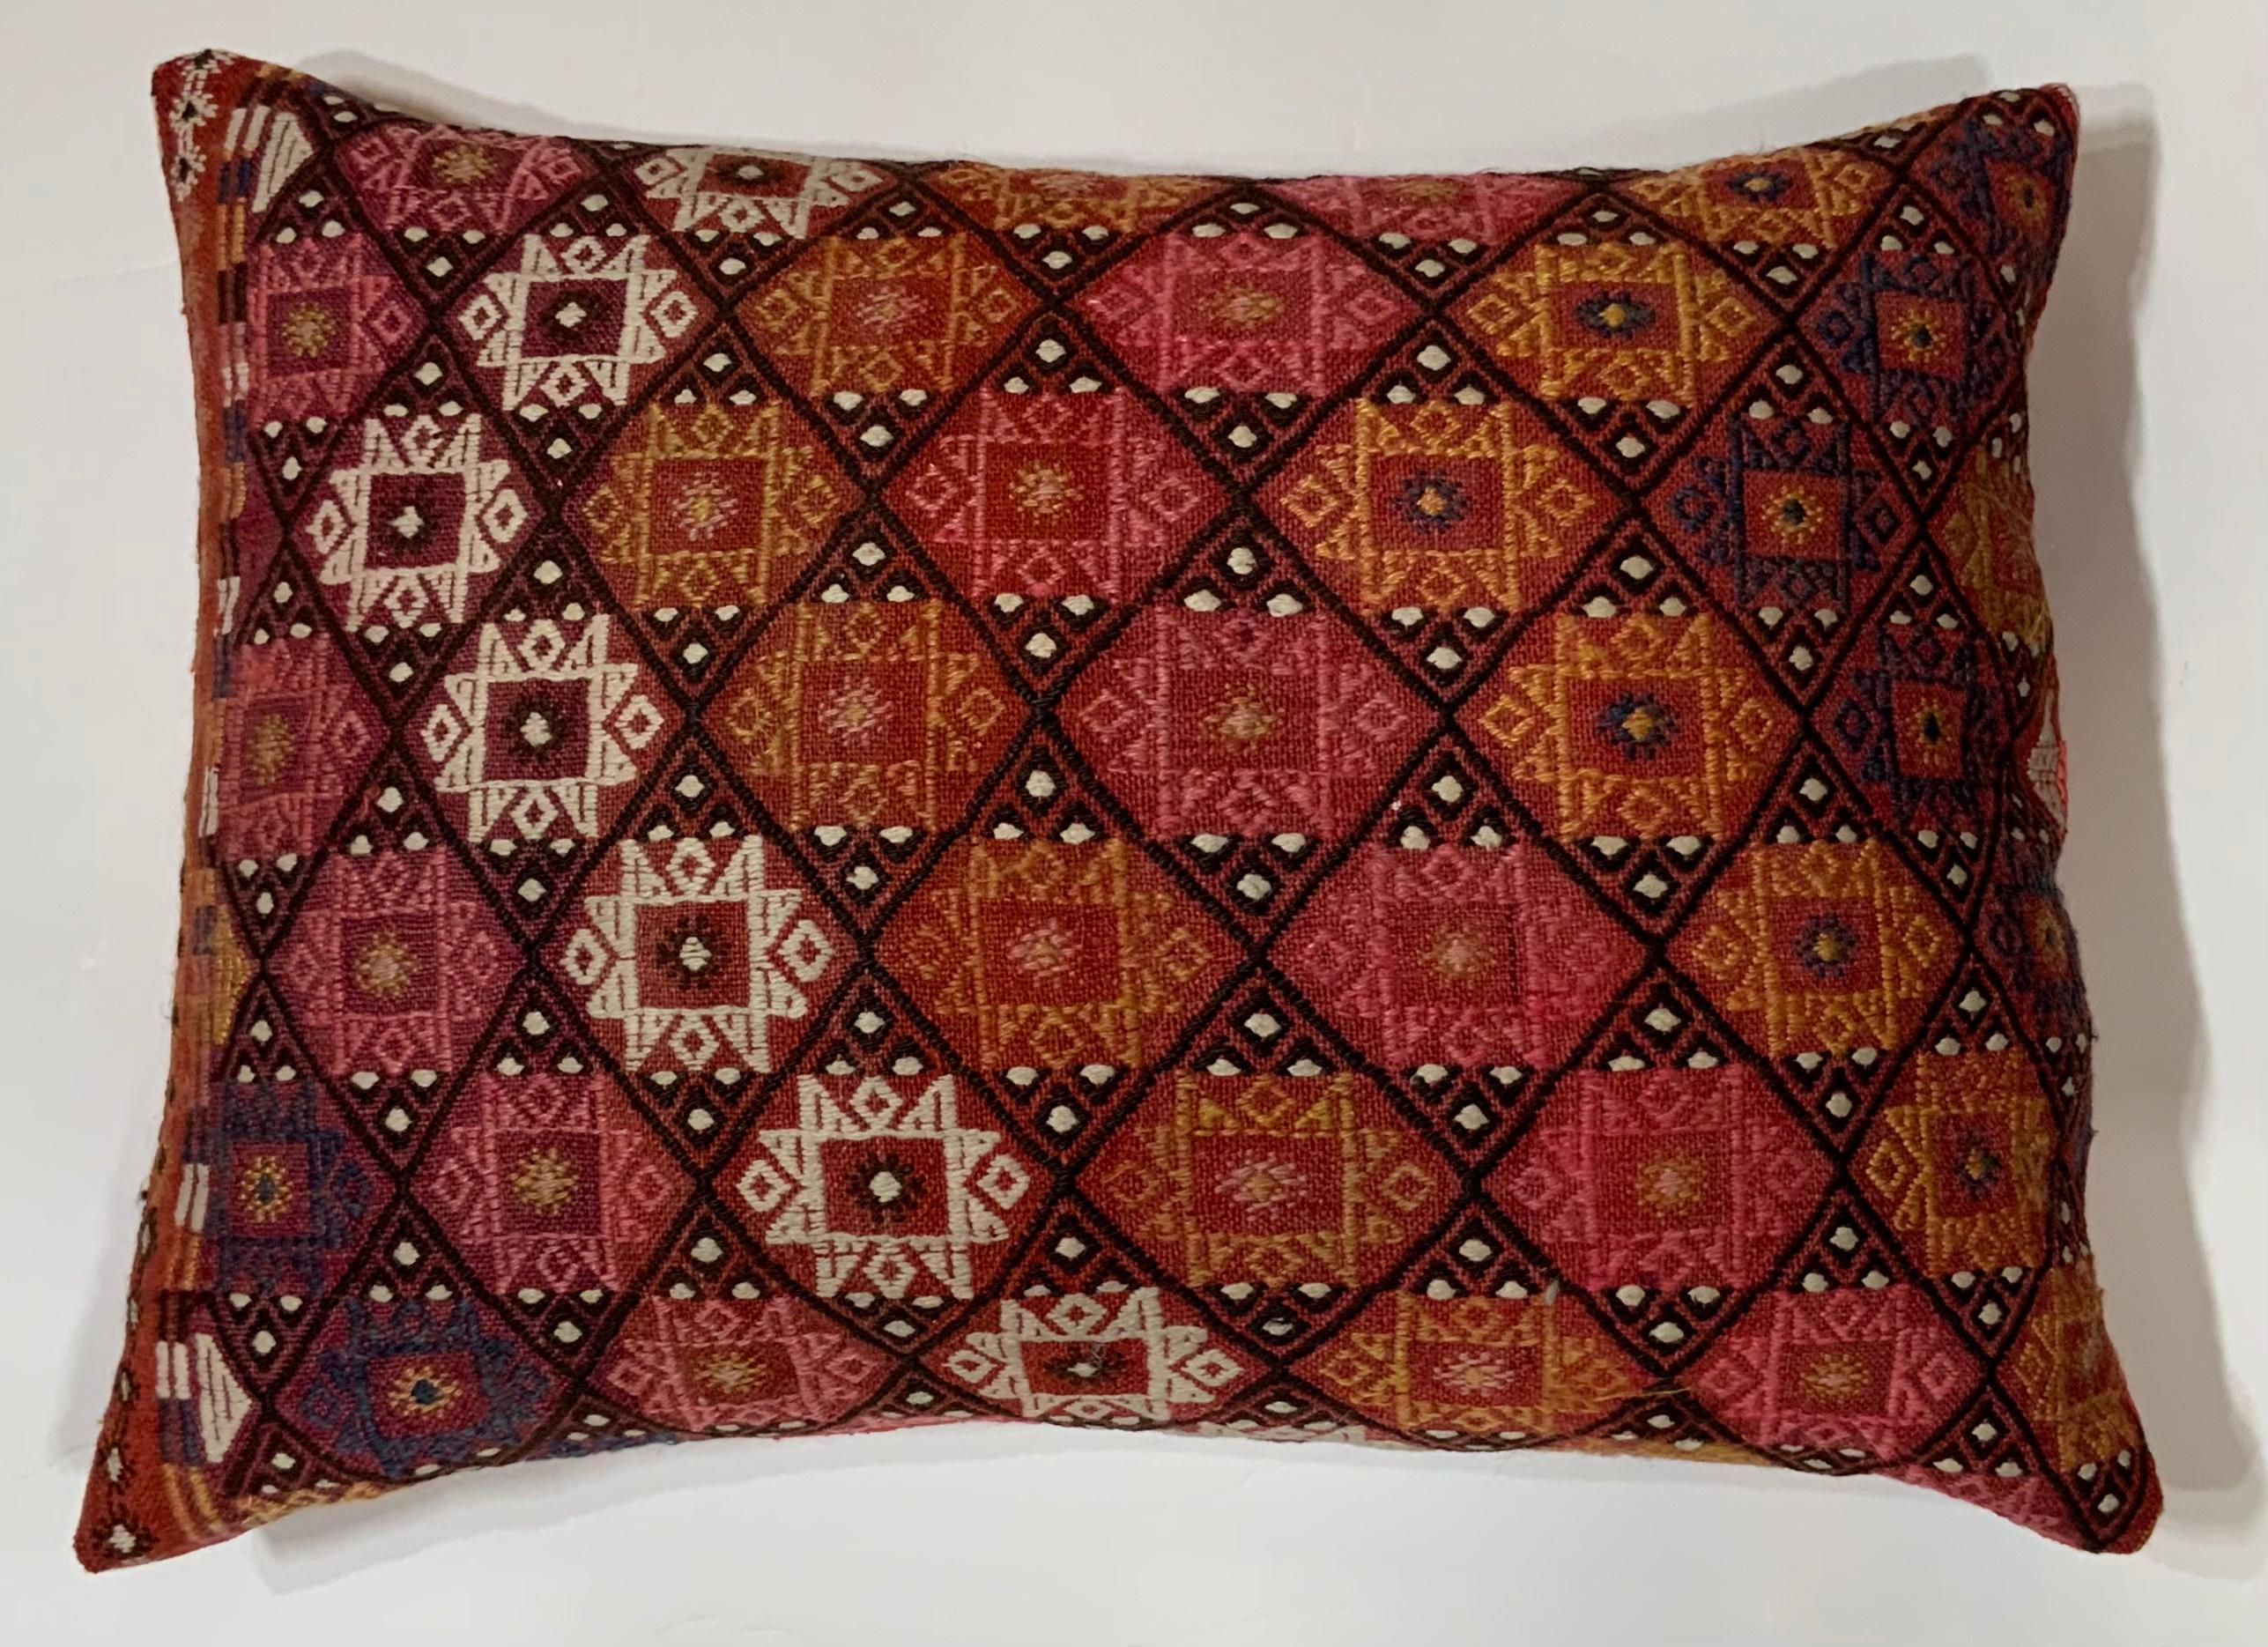 Hand-Knotted Single Vintage Hand Embroidery Pillow For Sale